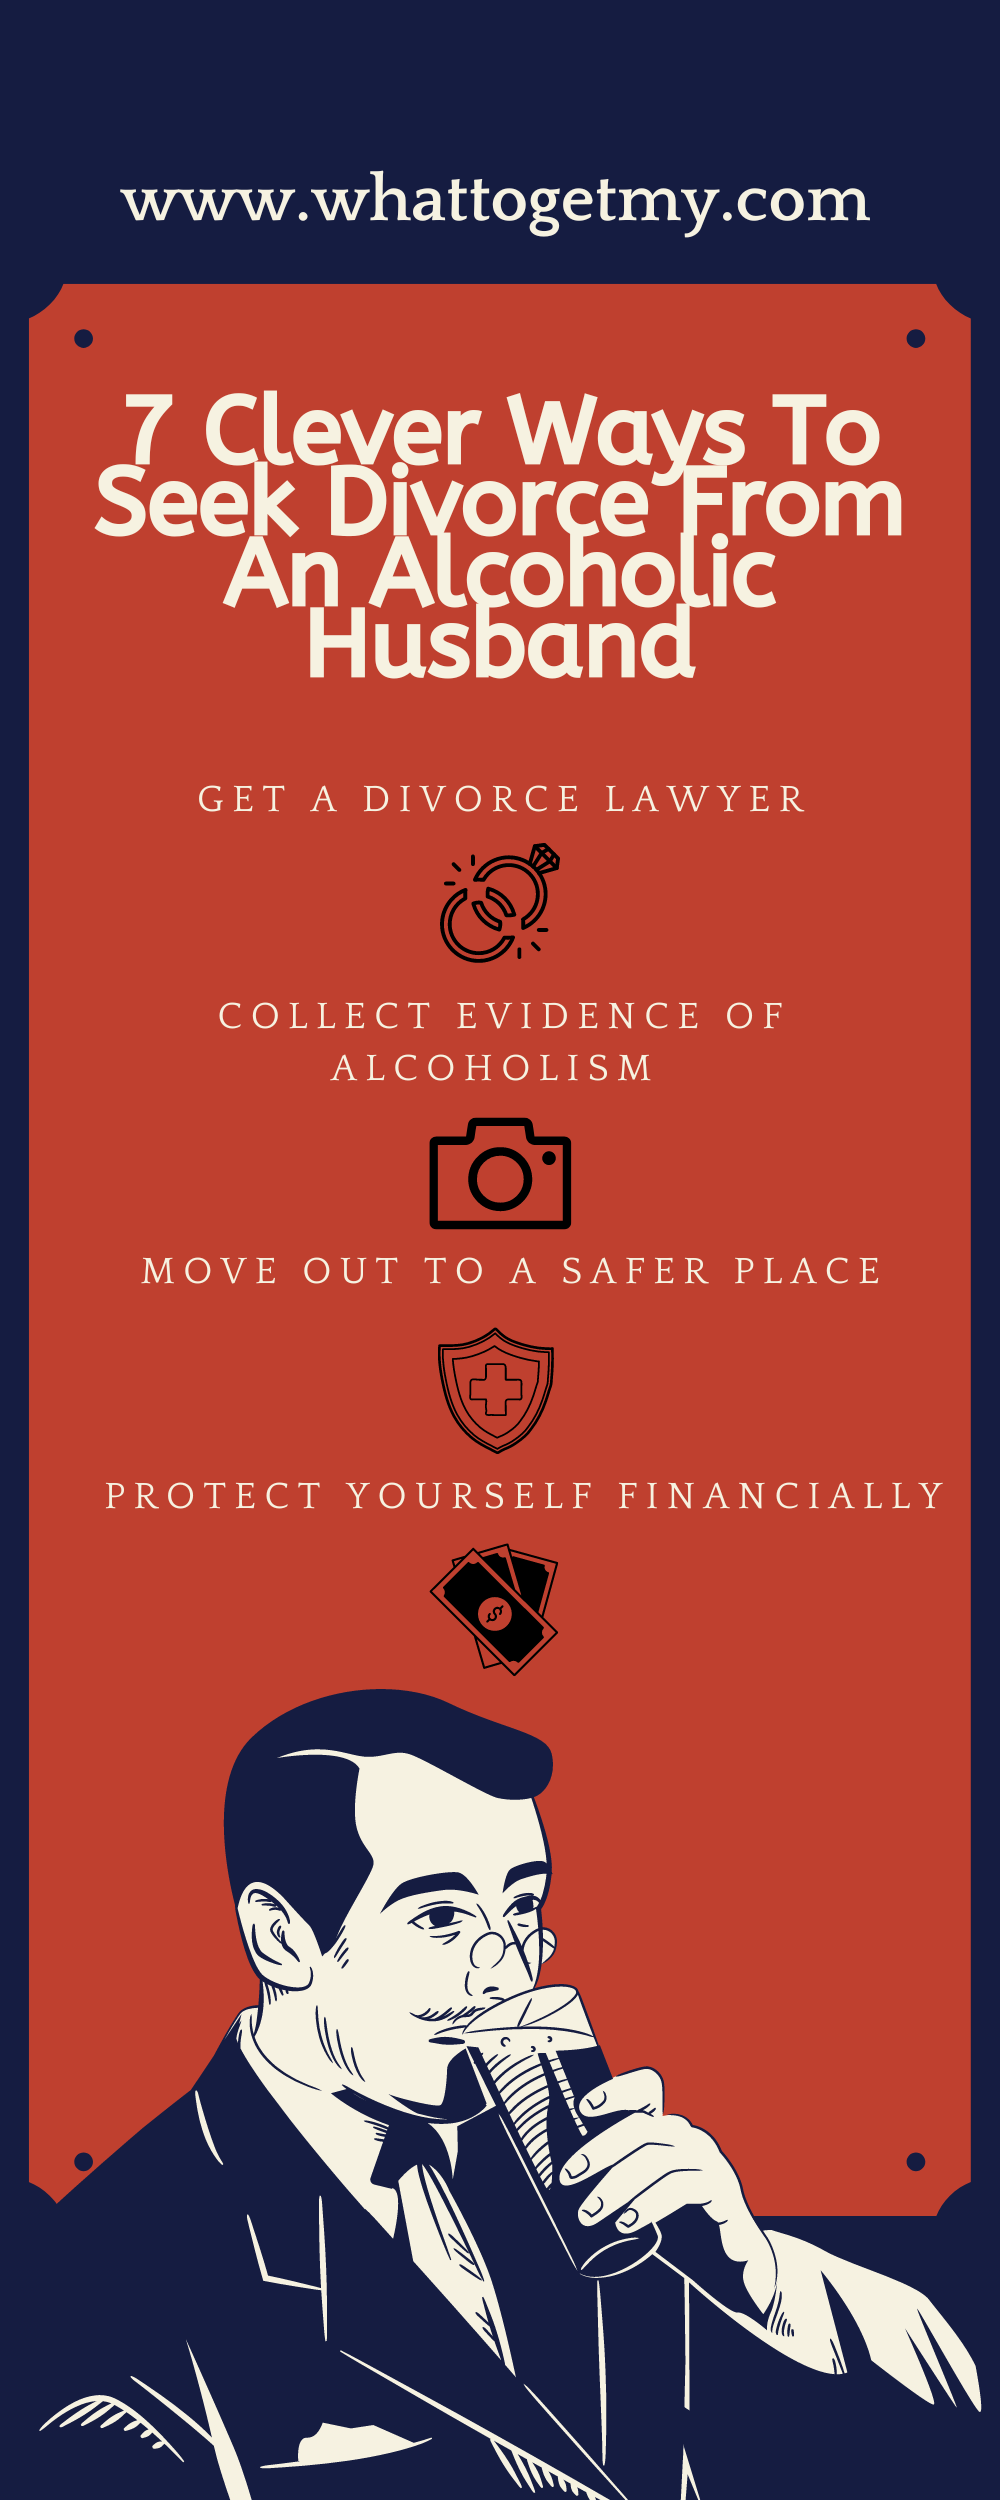 7 Clever Ways To Seek Divorce From An Alcoholic Husband